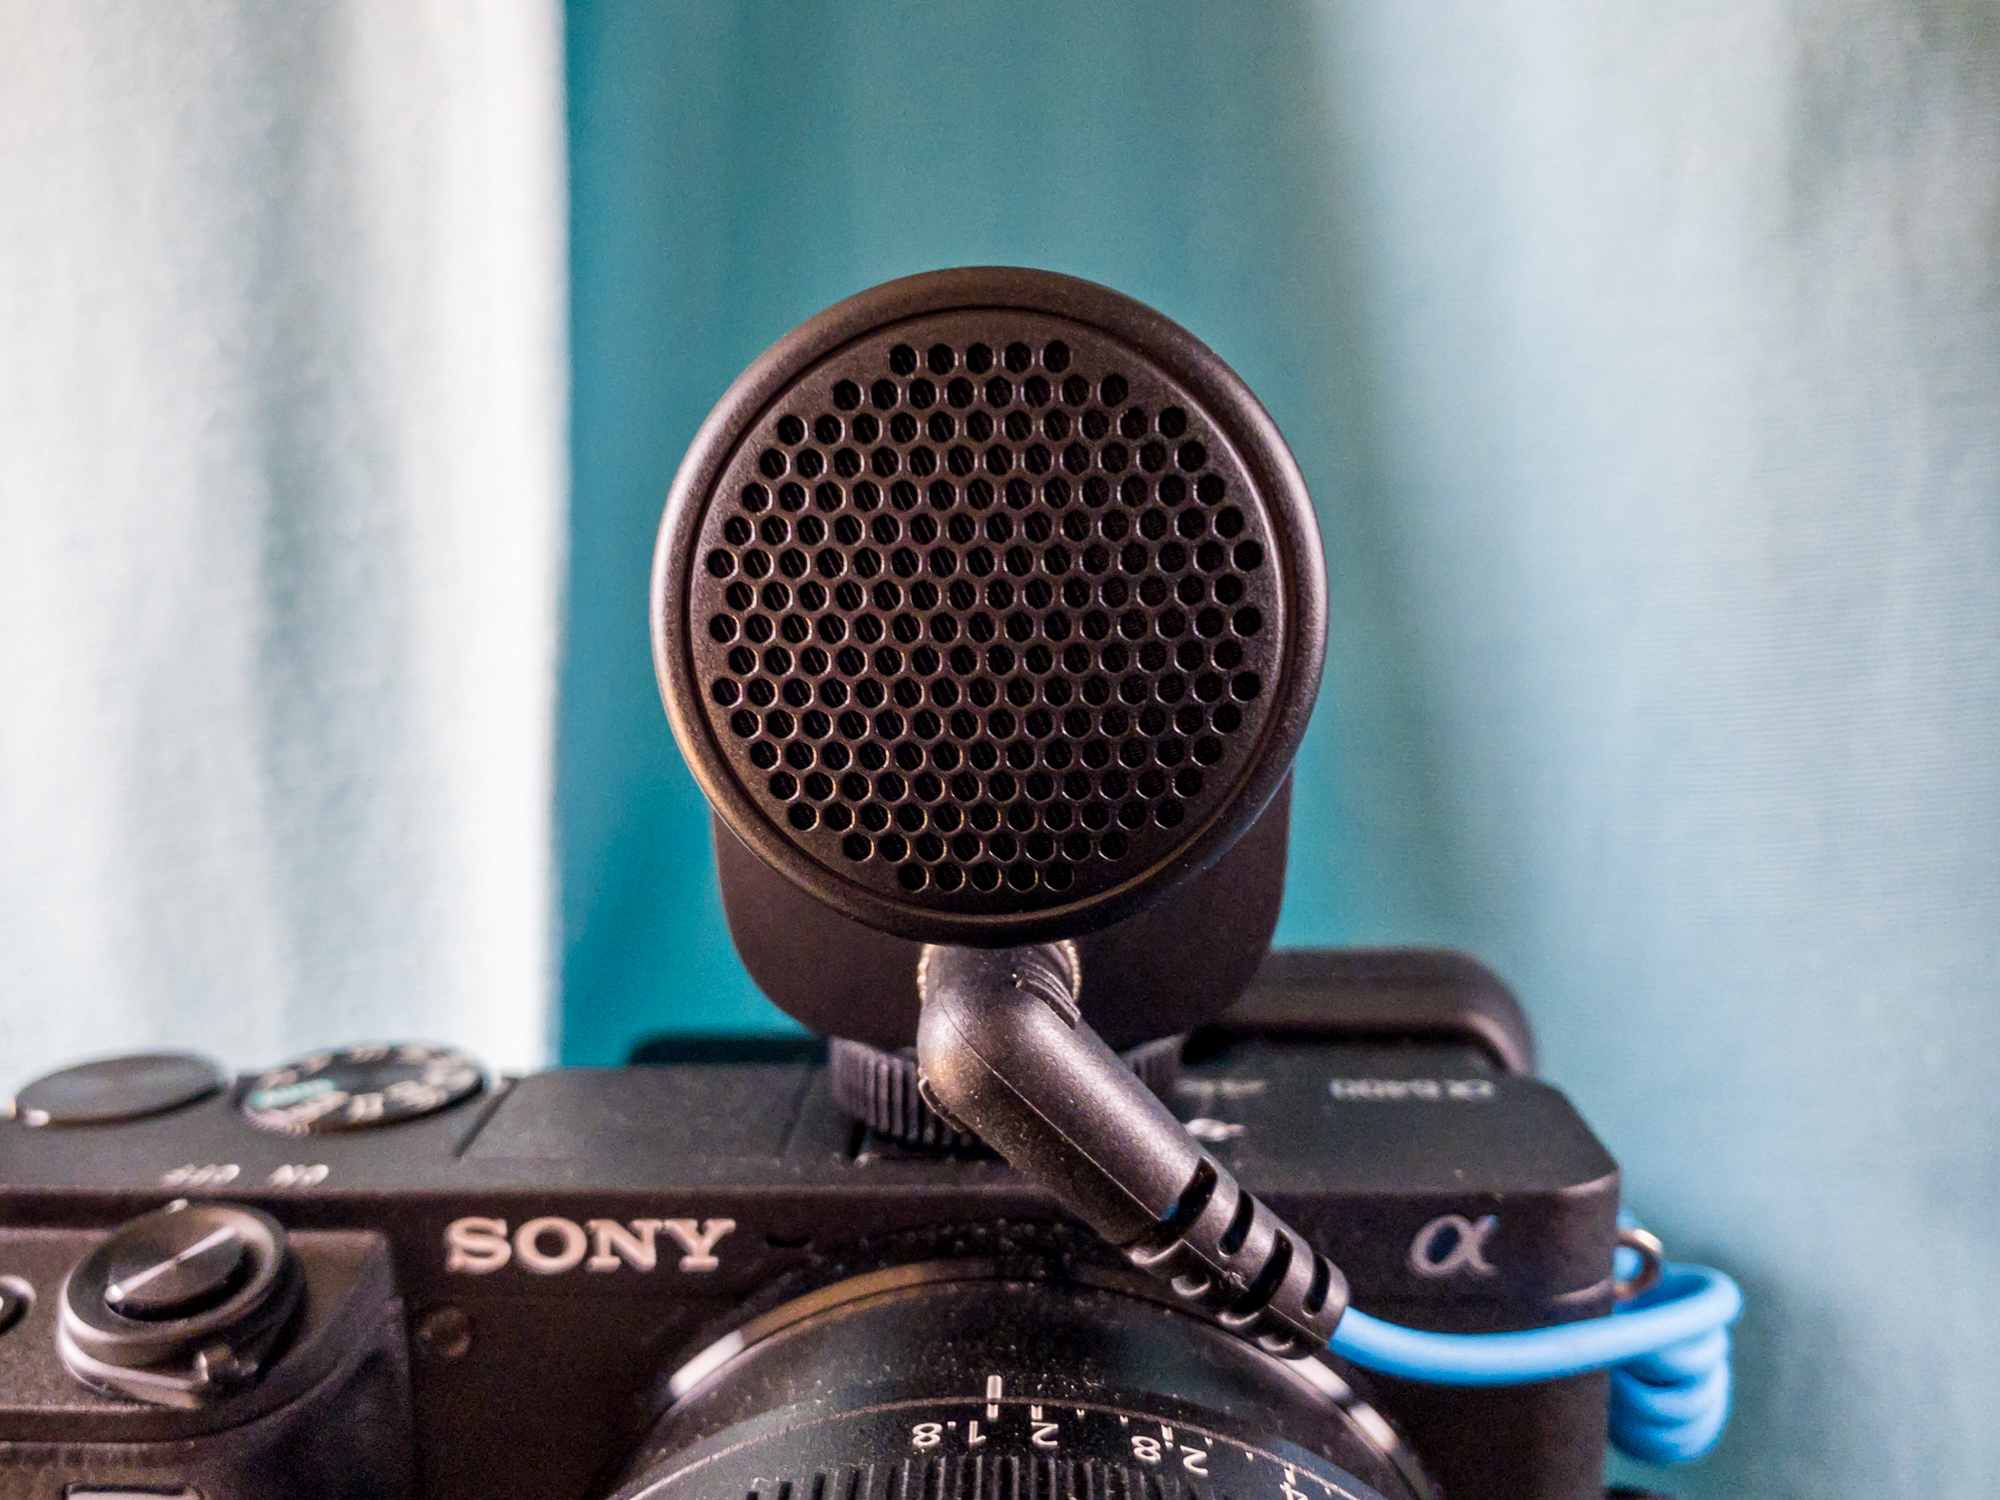 Sennheiser's MKE 200 on-camera microphone is the perfect home